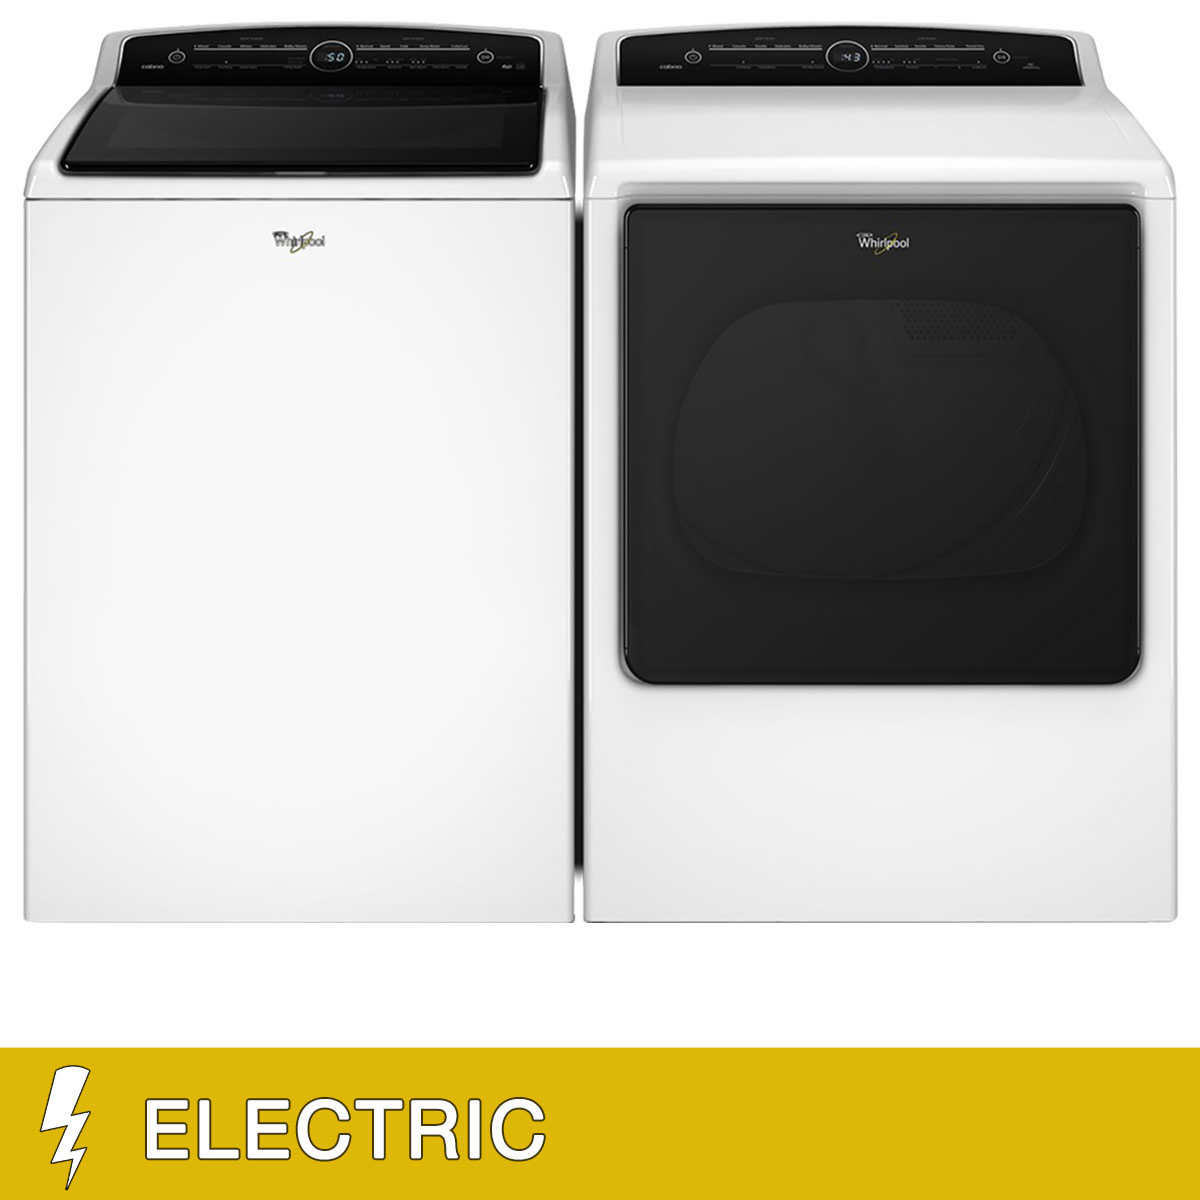 Whirlpool 5 3cuft Cabrio High Efficiency Washer With Precision Dispense And 8 8cuft Cabrio Electric Dryer With Quad Baffles In White,How To Clean A Front Load Washer